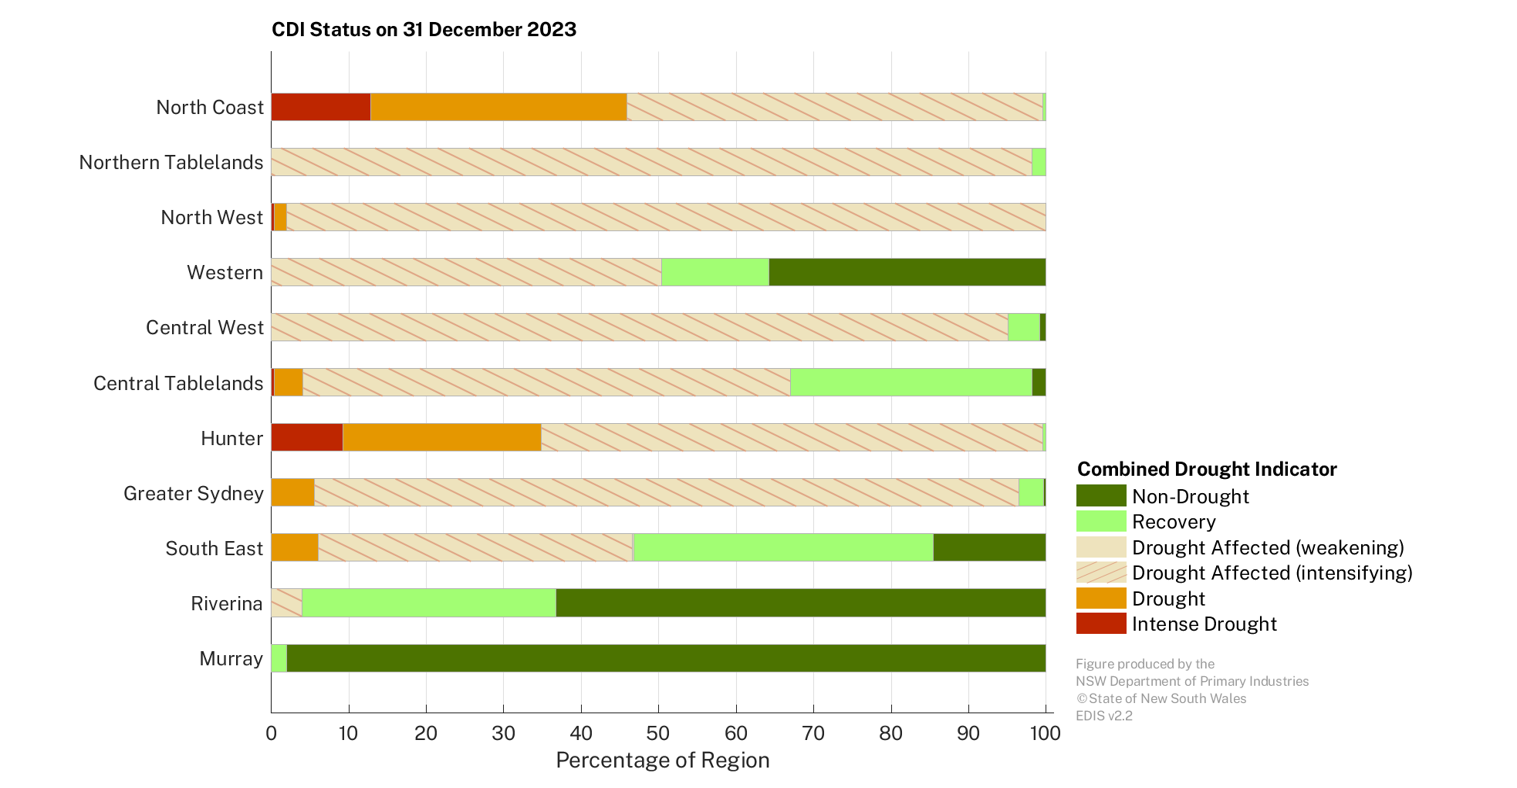 Figure 17. Combined Drought Indicator status for each individual Local Land Services region – 31 December 2023